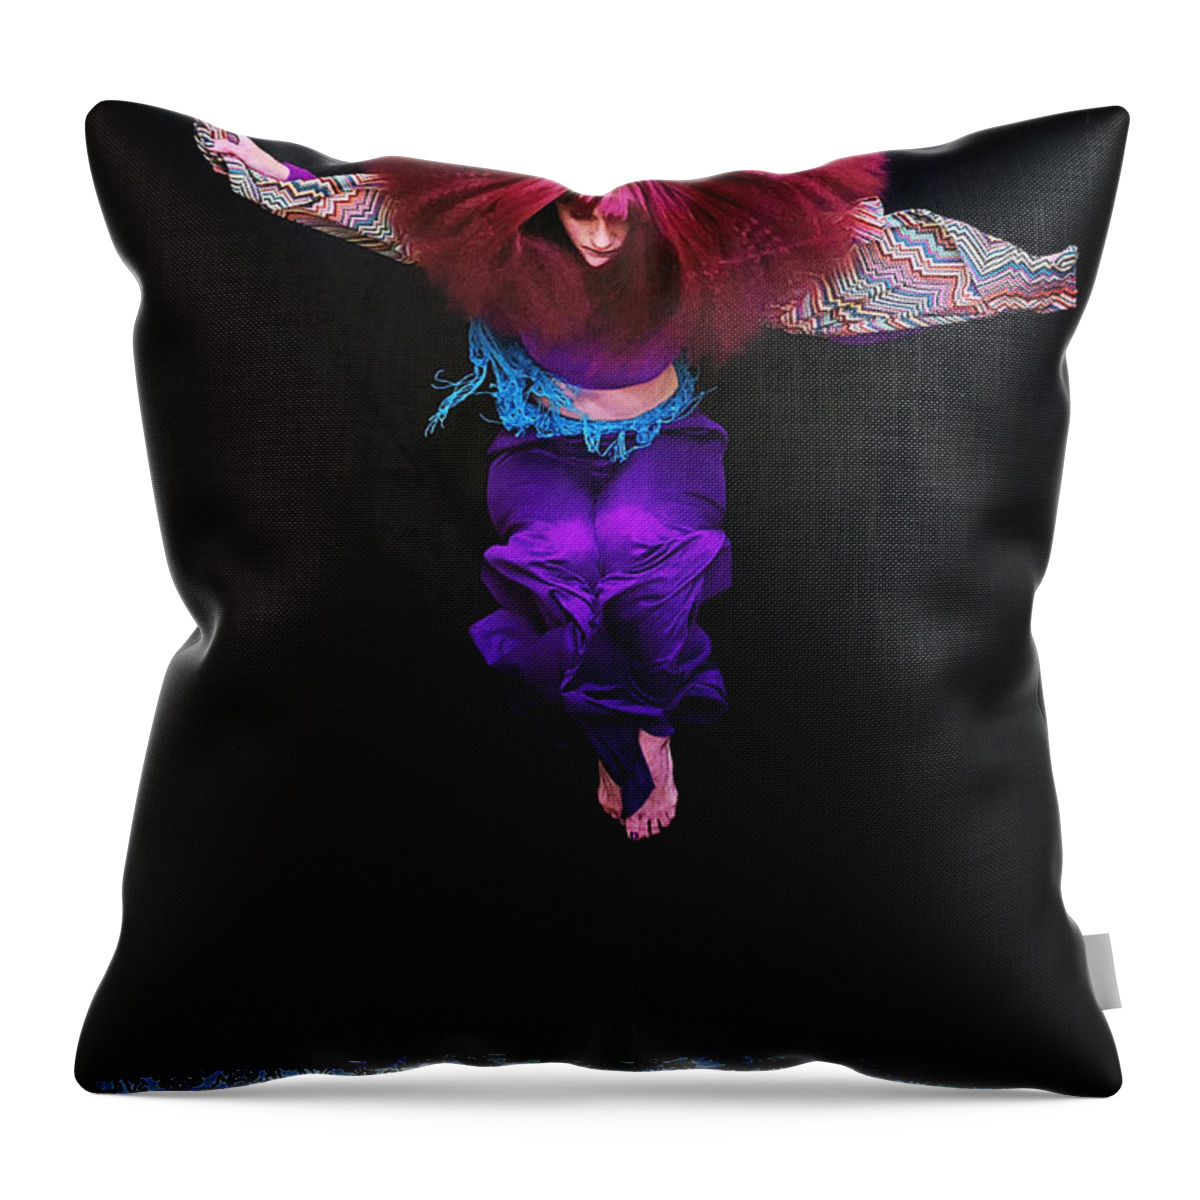 Human Arm Throw Pillow featuring the photograph Woman With Big Hair Jumping by Cynthia Saxon Cox